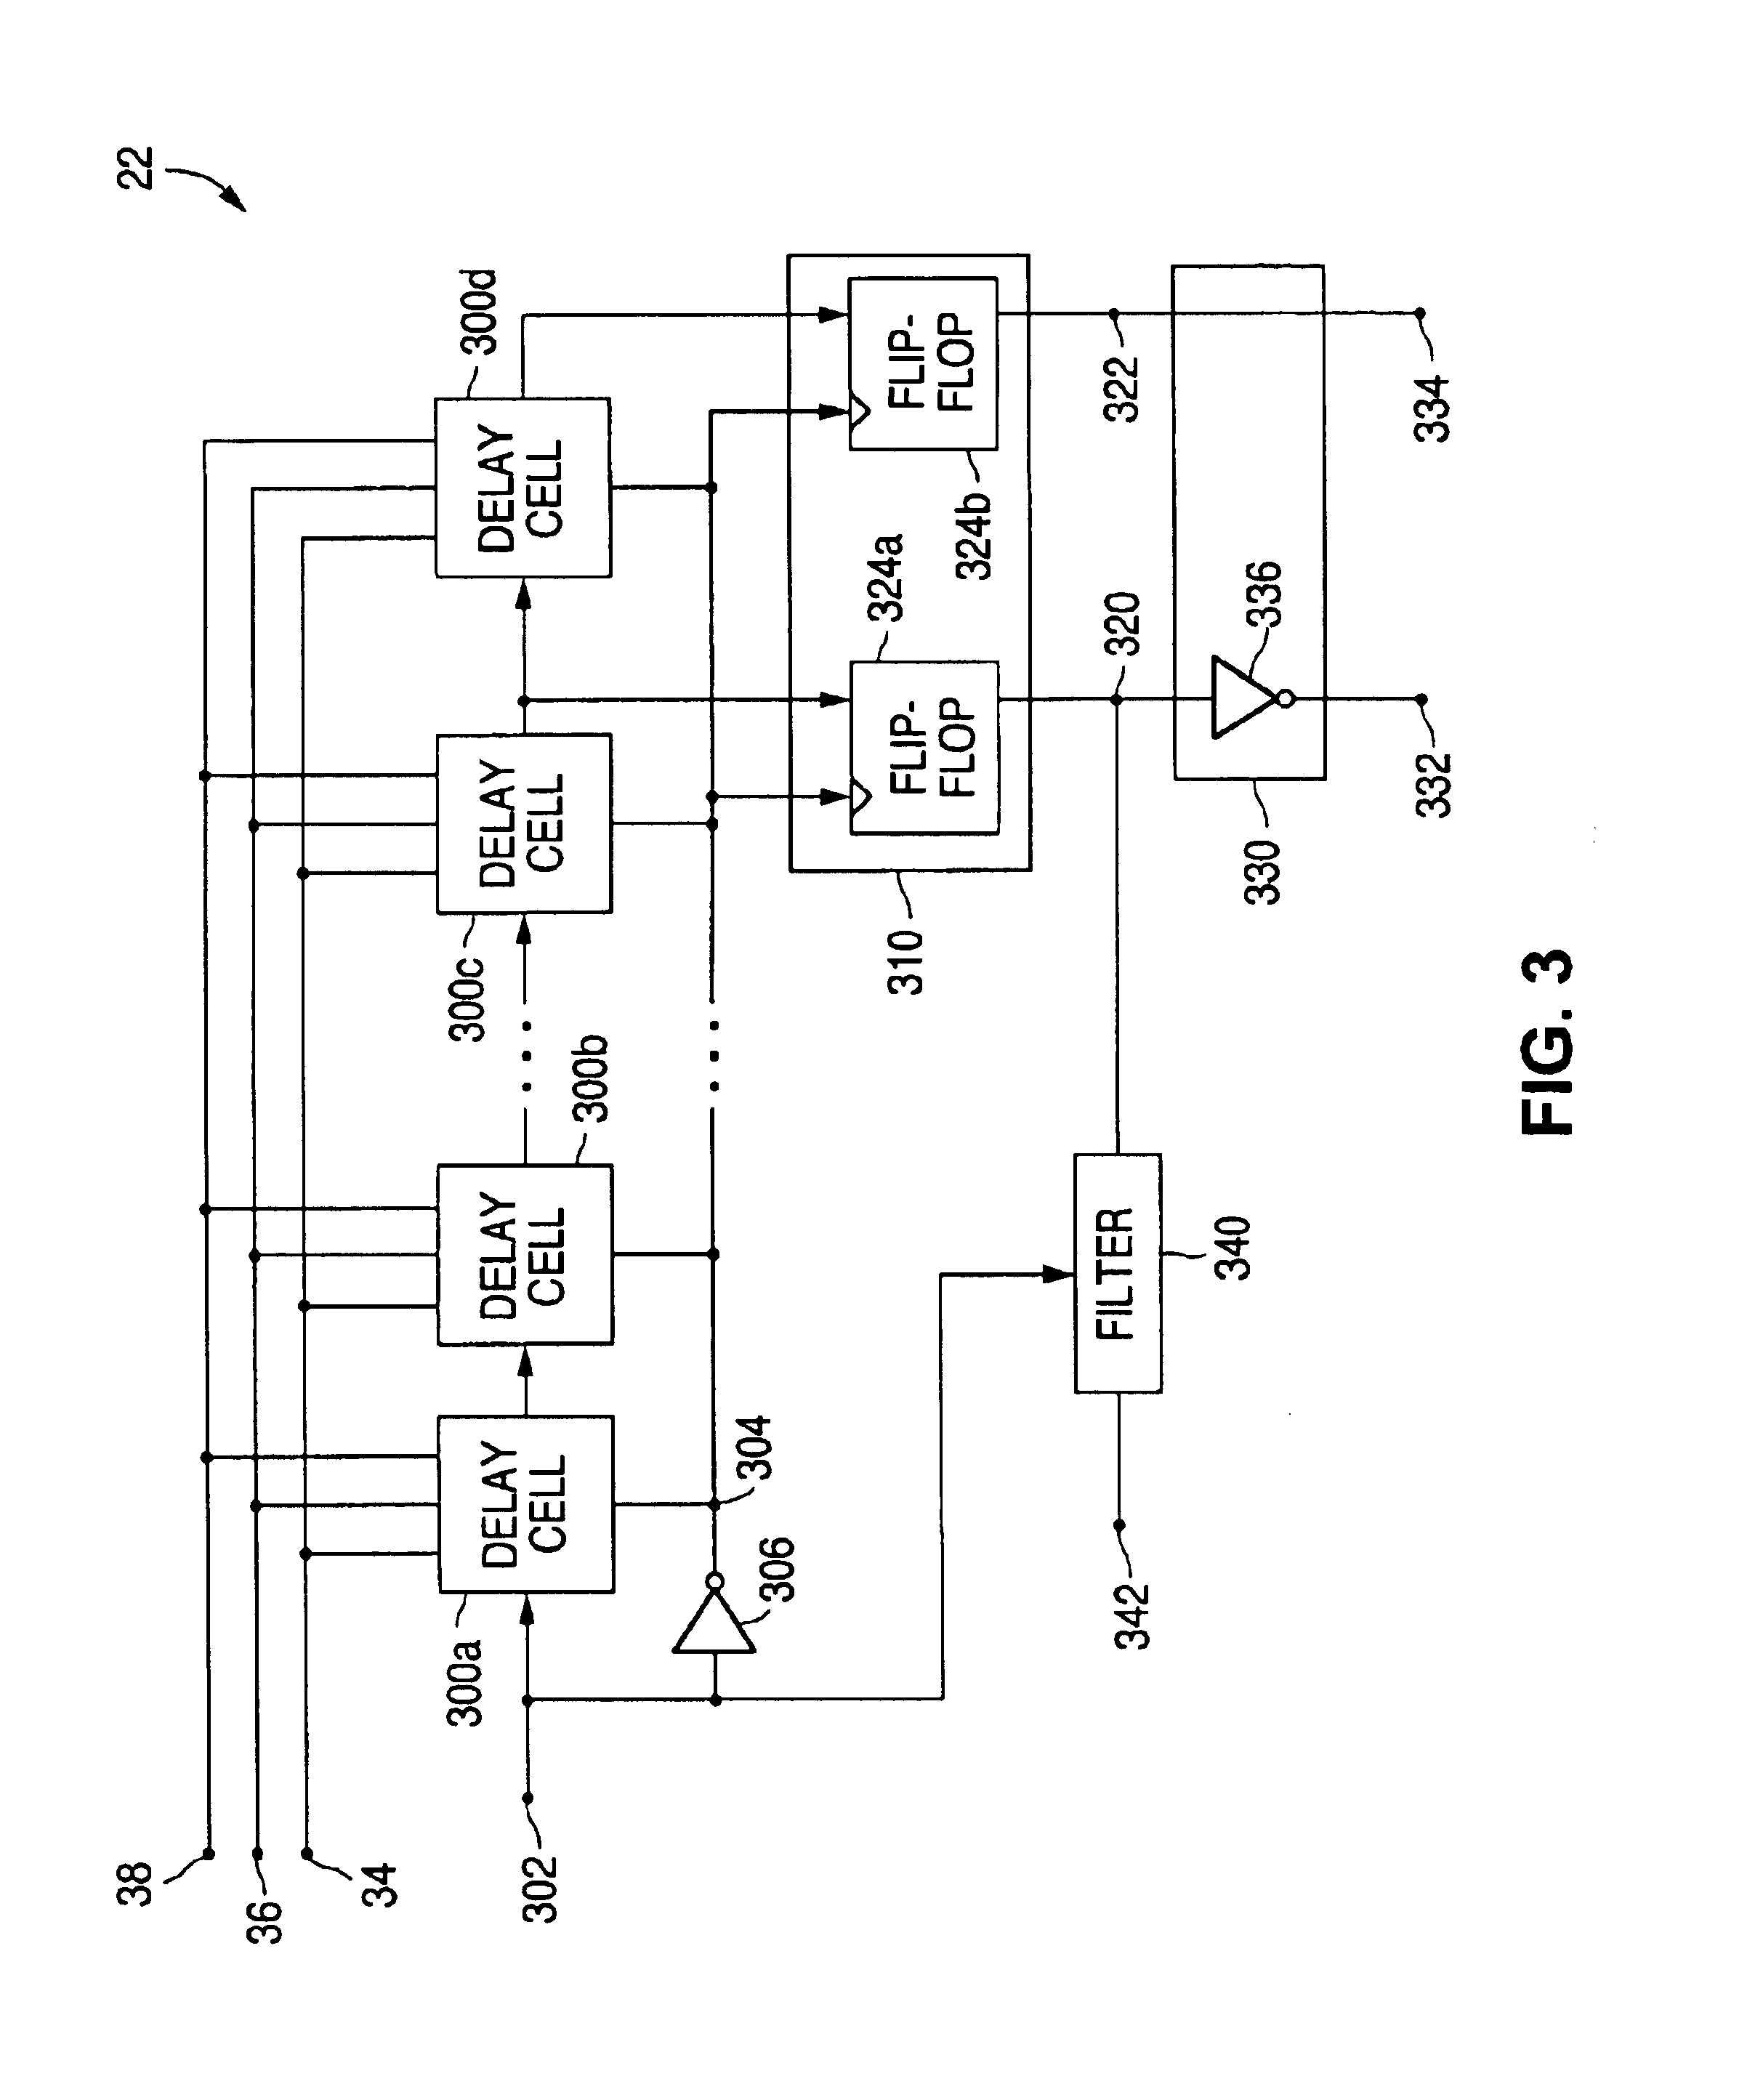 Method and system for reducing leakage current in integrated circuits using adaptively adjusted source voltages